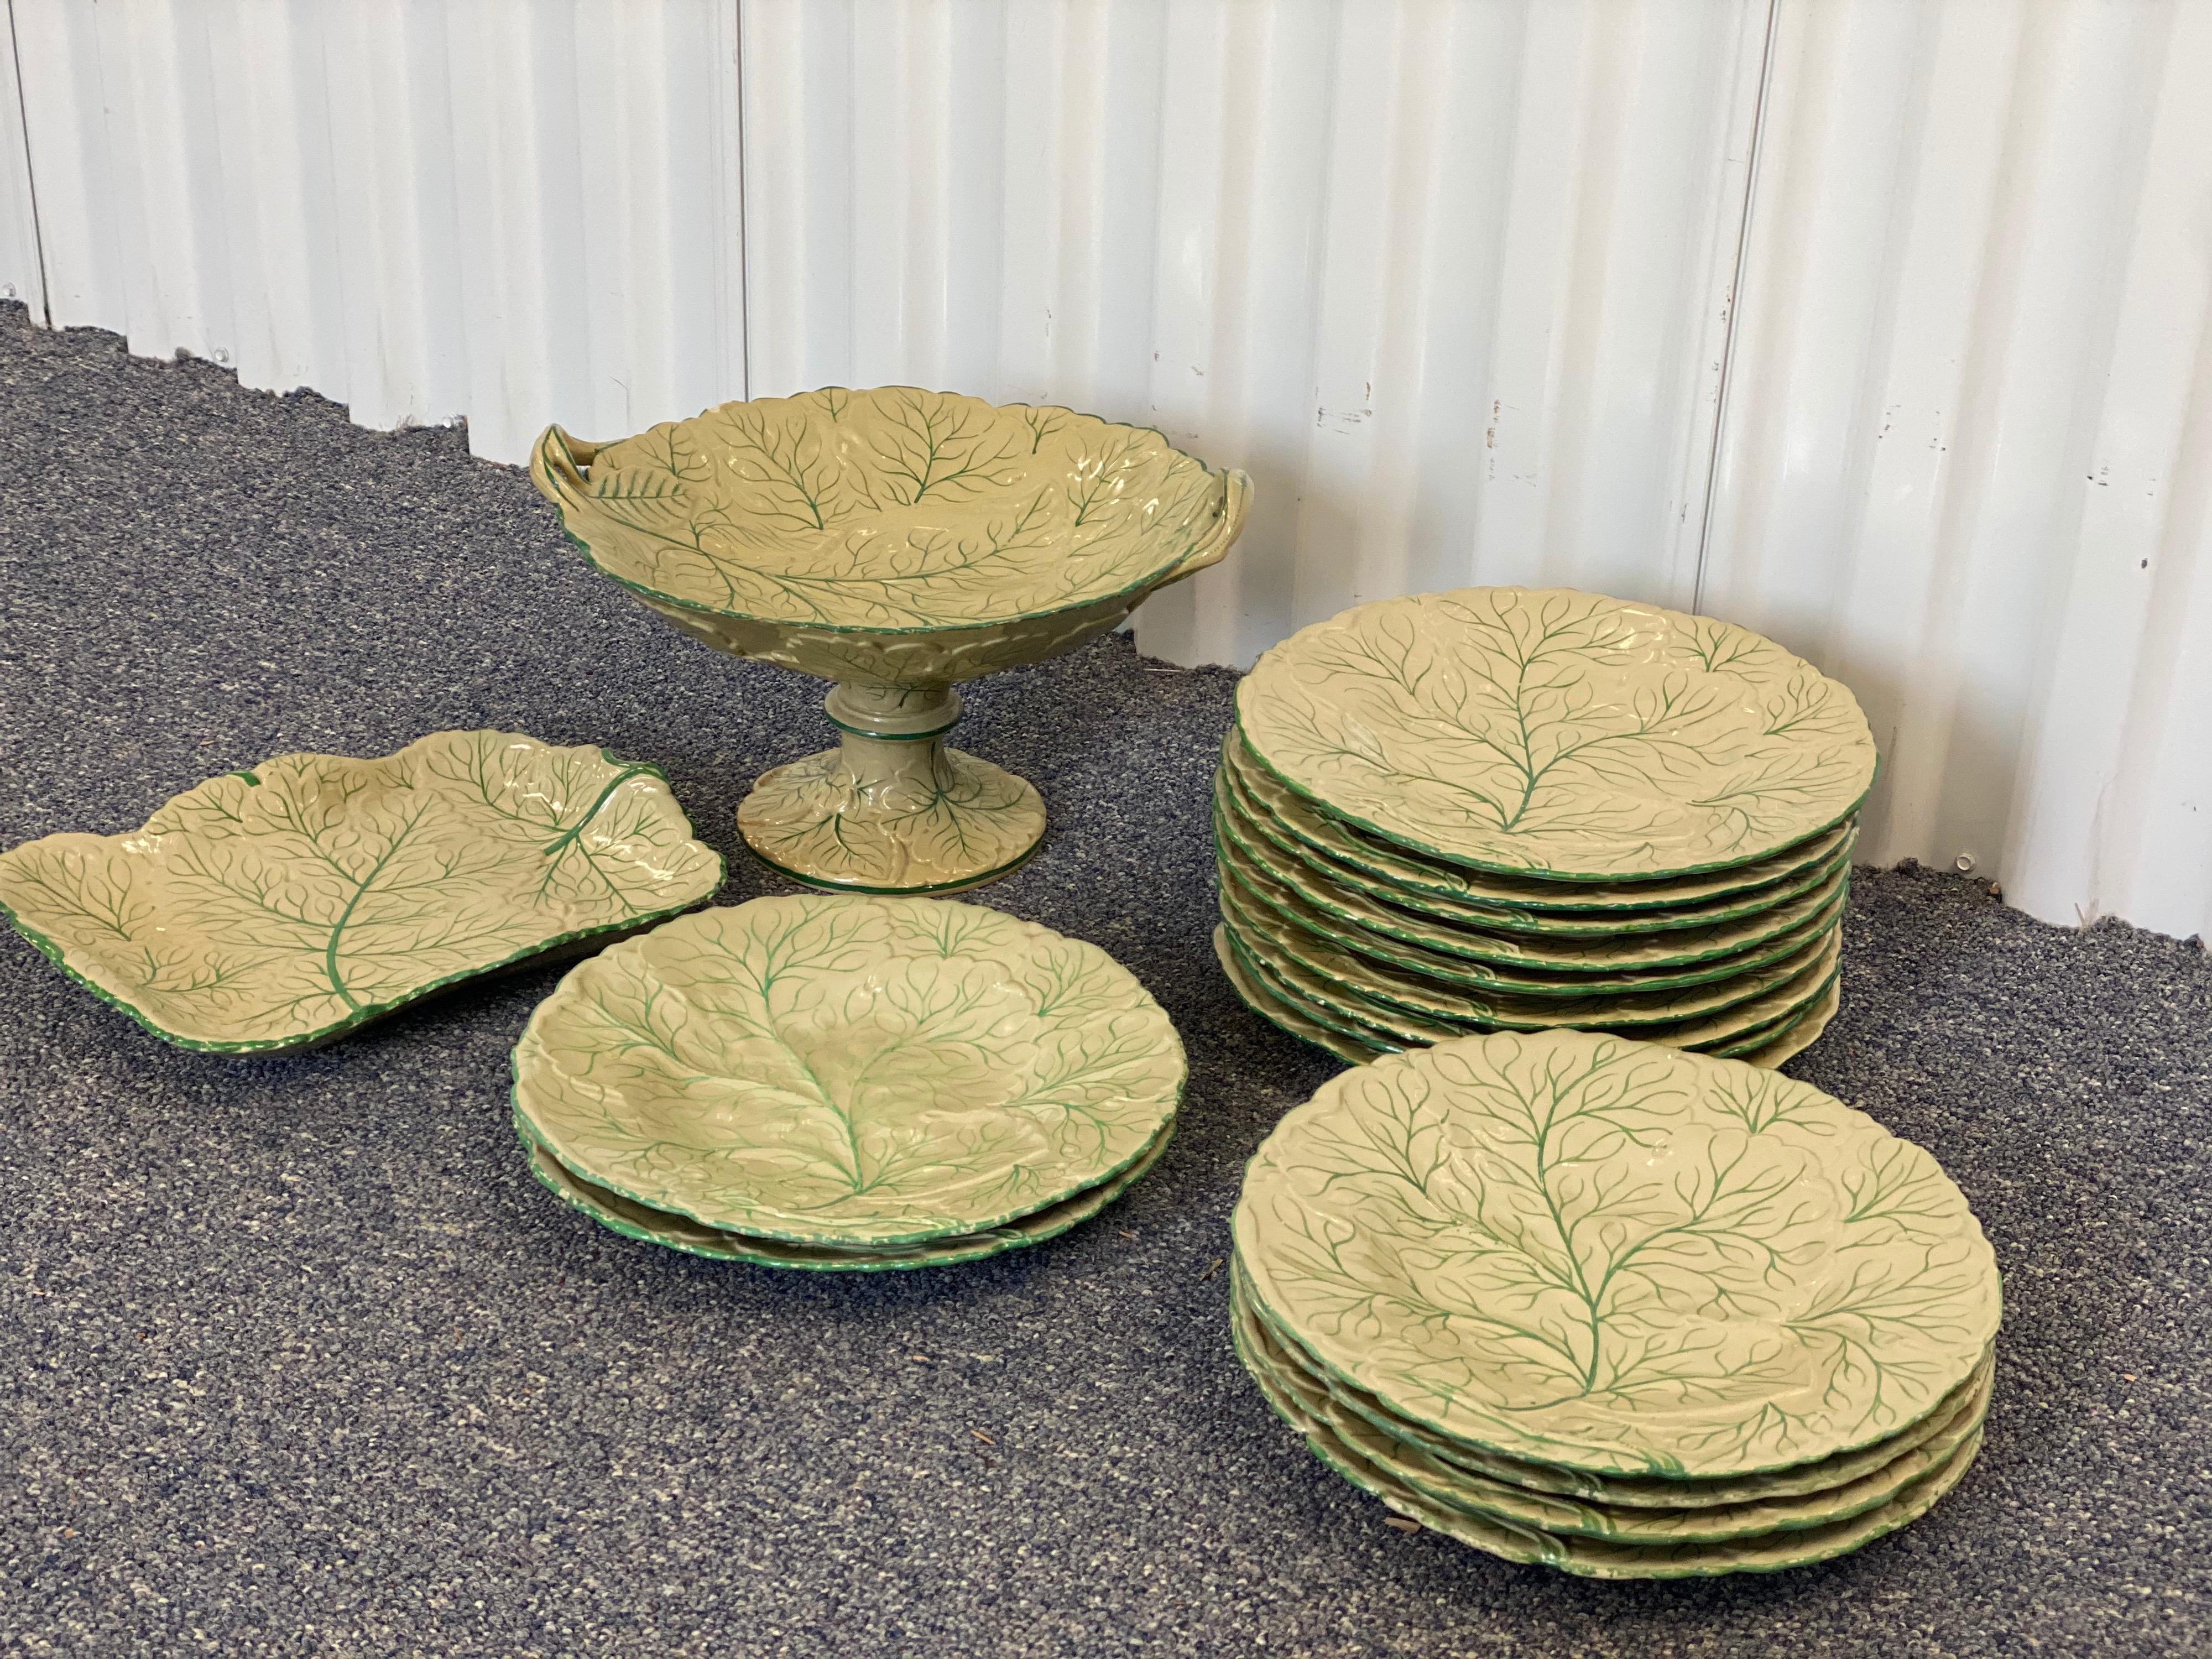 Leaf porcelain dessert set of 17 pieces includes 15 plates, one pedestal serving bowl, and one platter. This porcelain set boasts a lovely hand painted pattern mimicking the veins on a leaf or even that of a cabbage. The edges of the plates and the